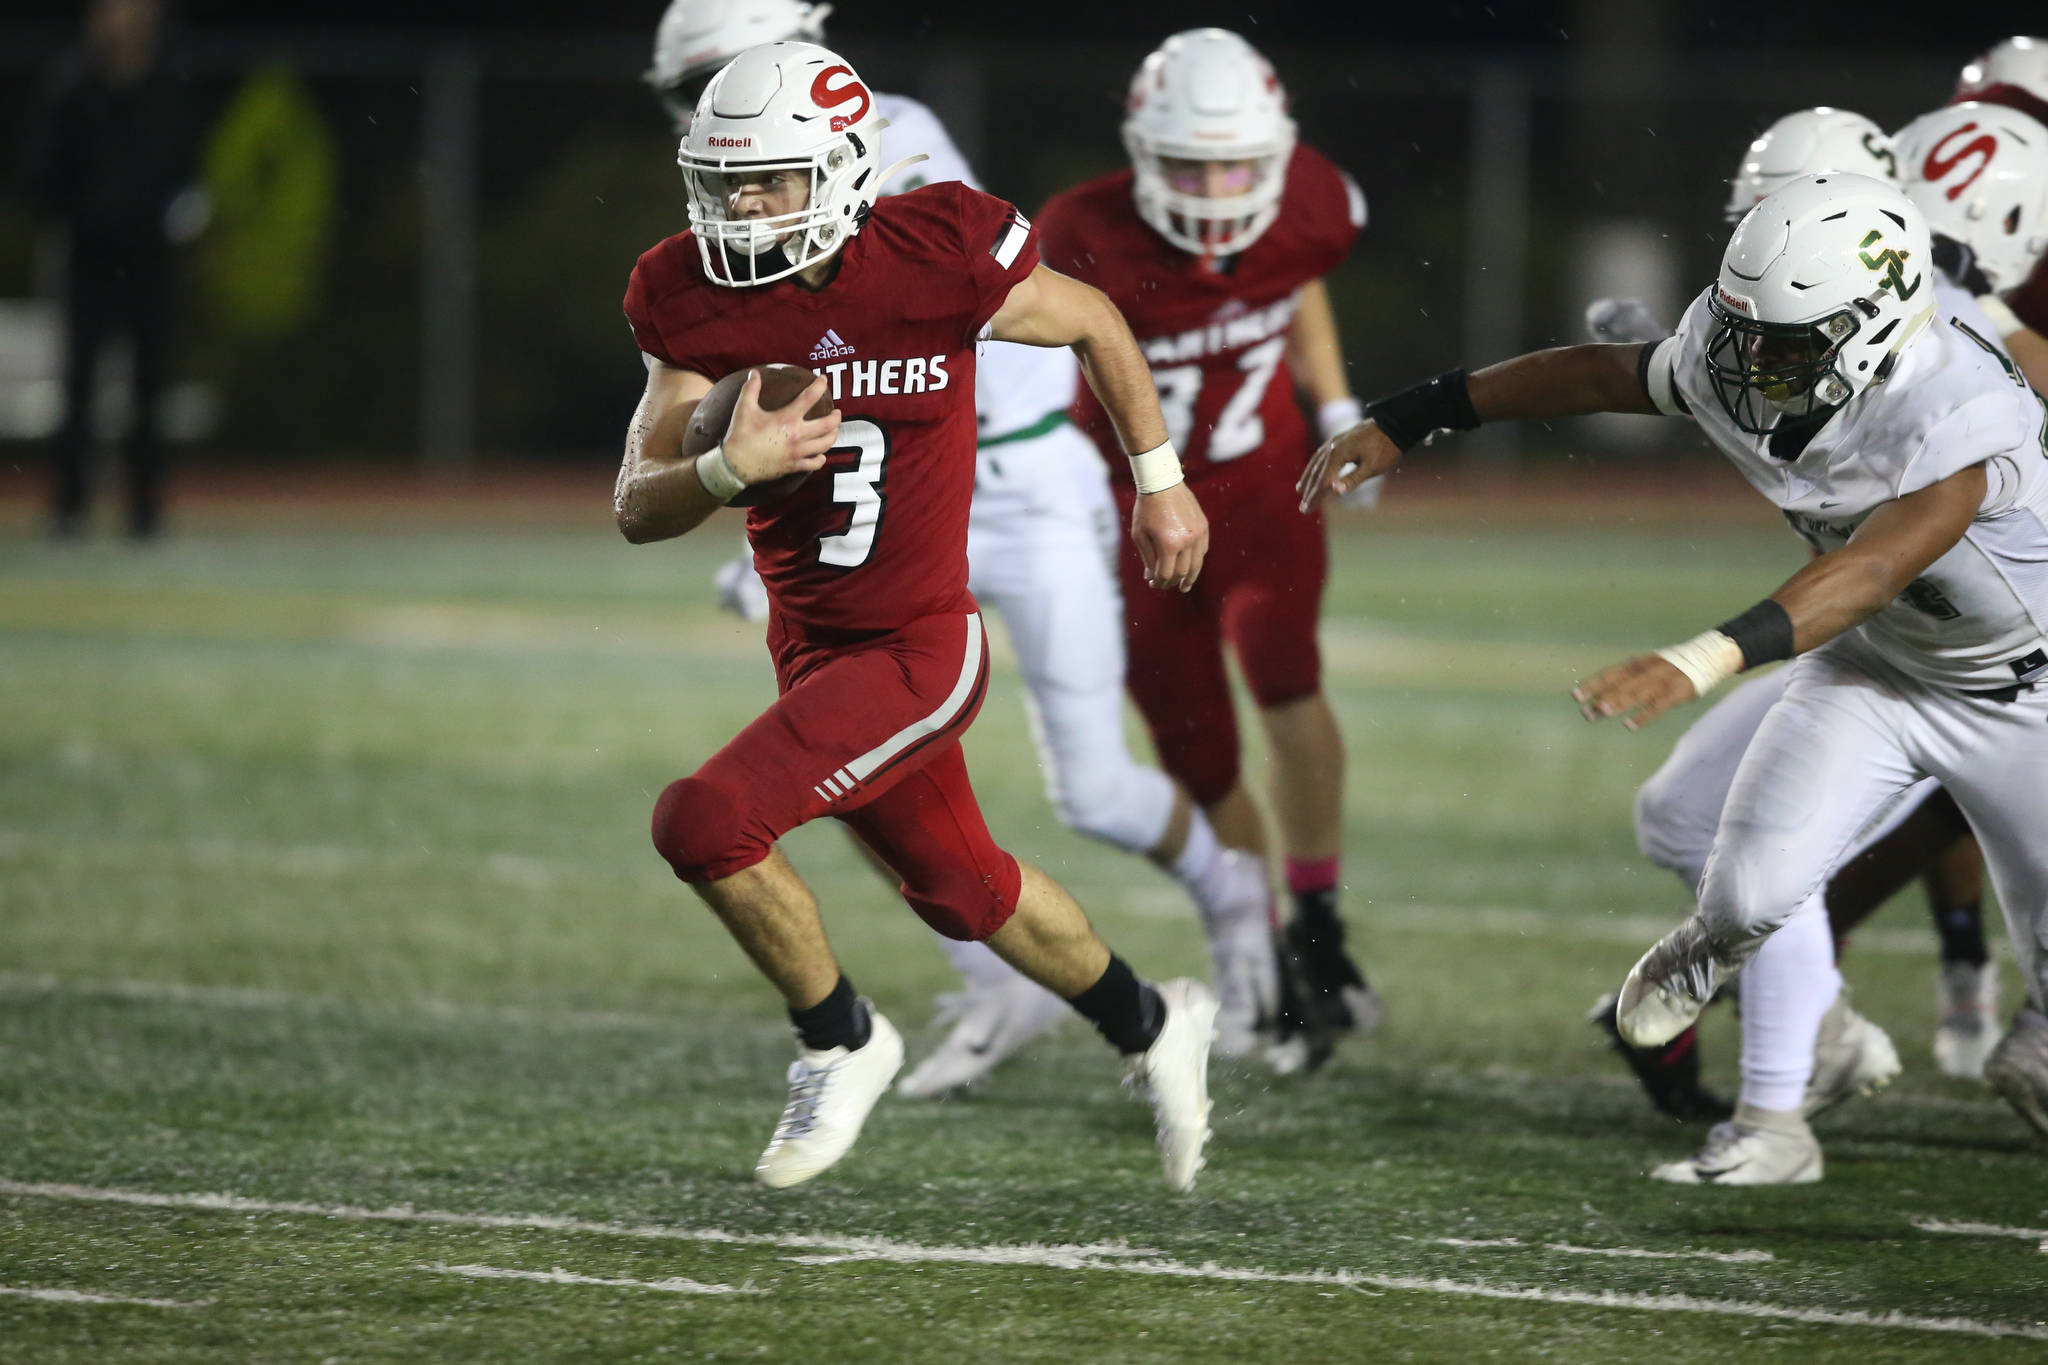 Joshua Vandergriend and Snohomish travel to face Edmonds-Woodway for a pivotal Wesco 3A South matchup Friday night. (Andy Bronson / The Herald)